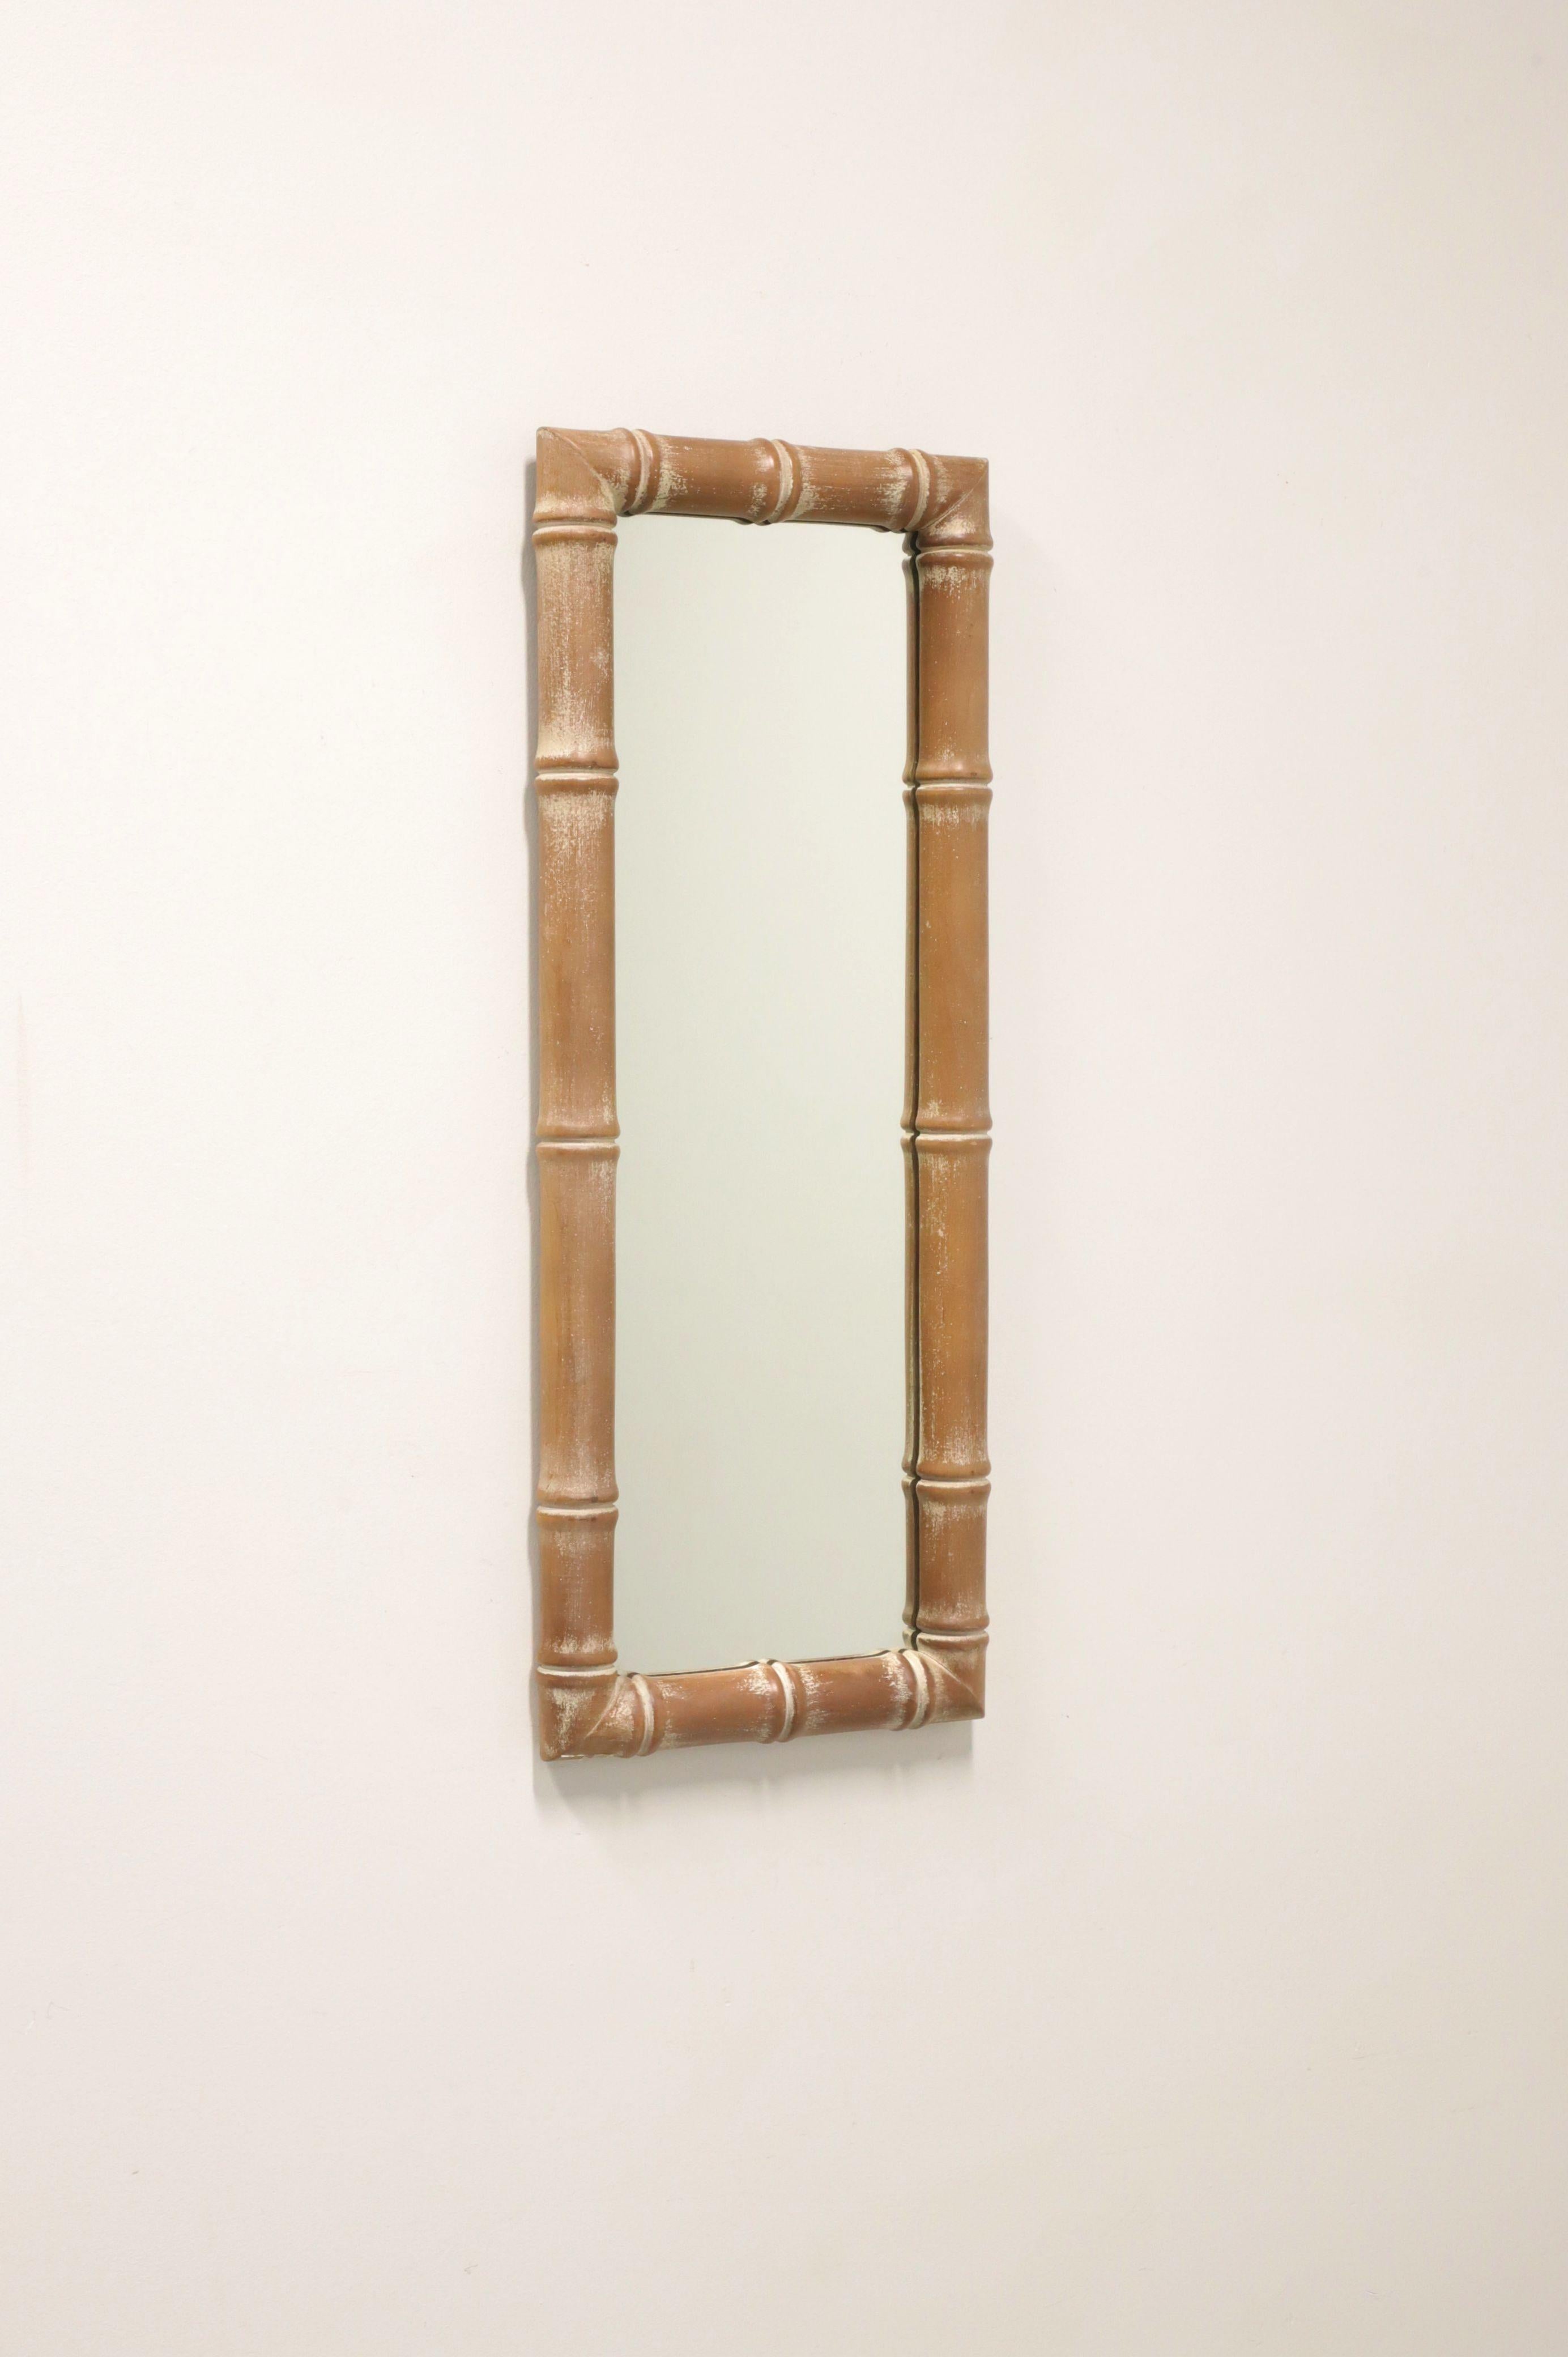 An Asian Influenced wall mirror, unbranded. Mirrored glass in a rectangular shaped whitewashed brown color faux bamboo frame. Made in Spain, in the mid 20th Century. 

Measures: 13.25w 2d 34.5h, Weighs Approximately: 10lbs

Exceptionally good